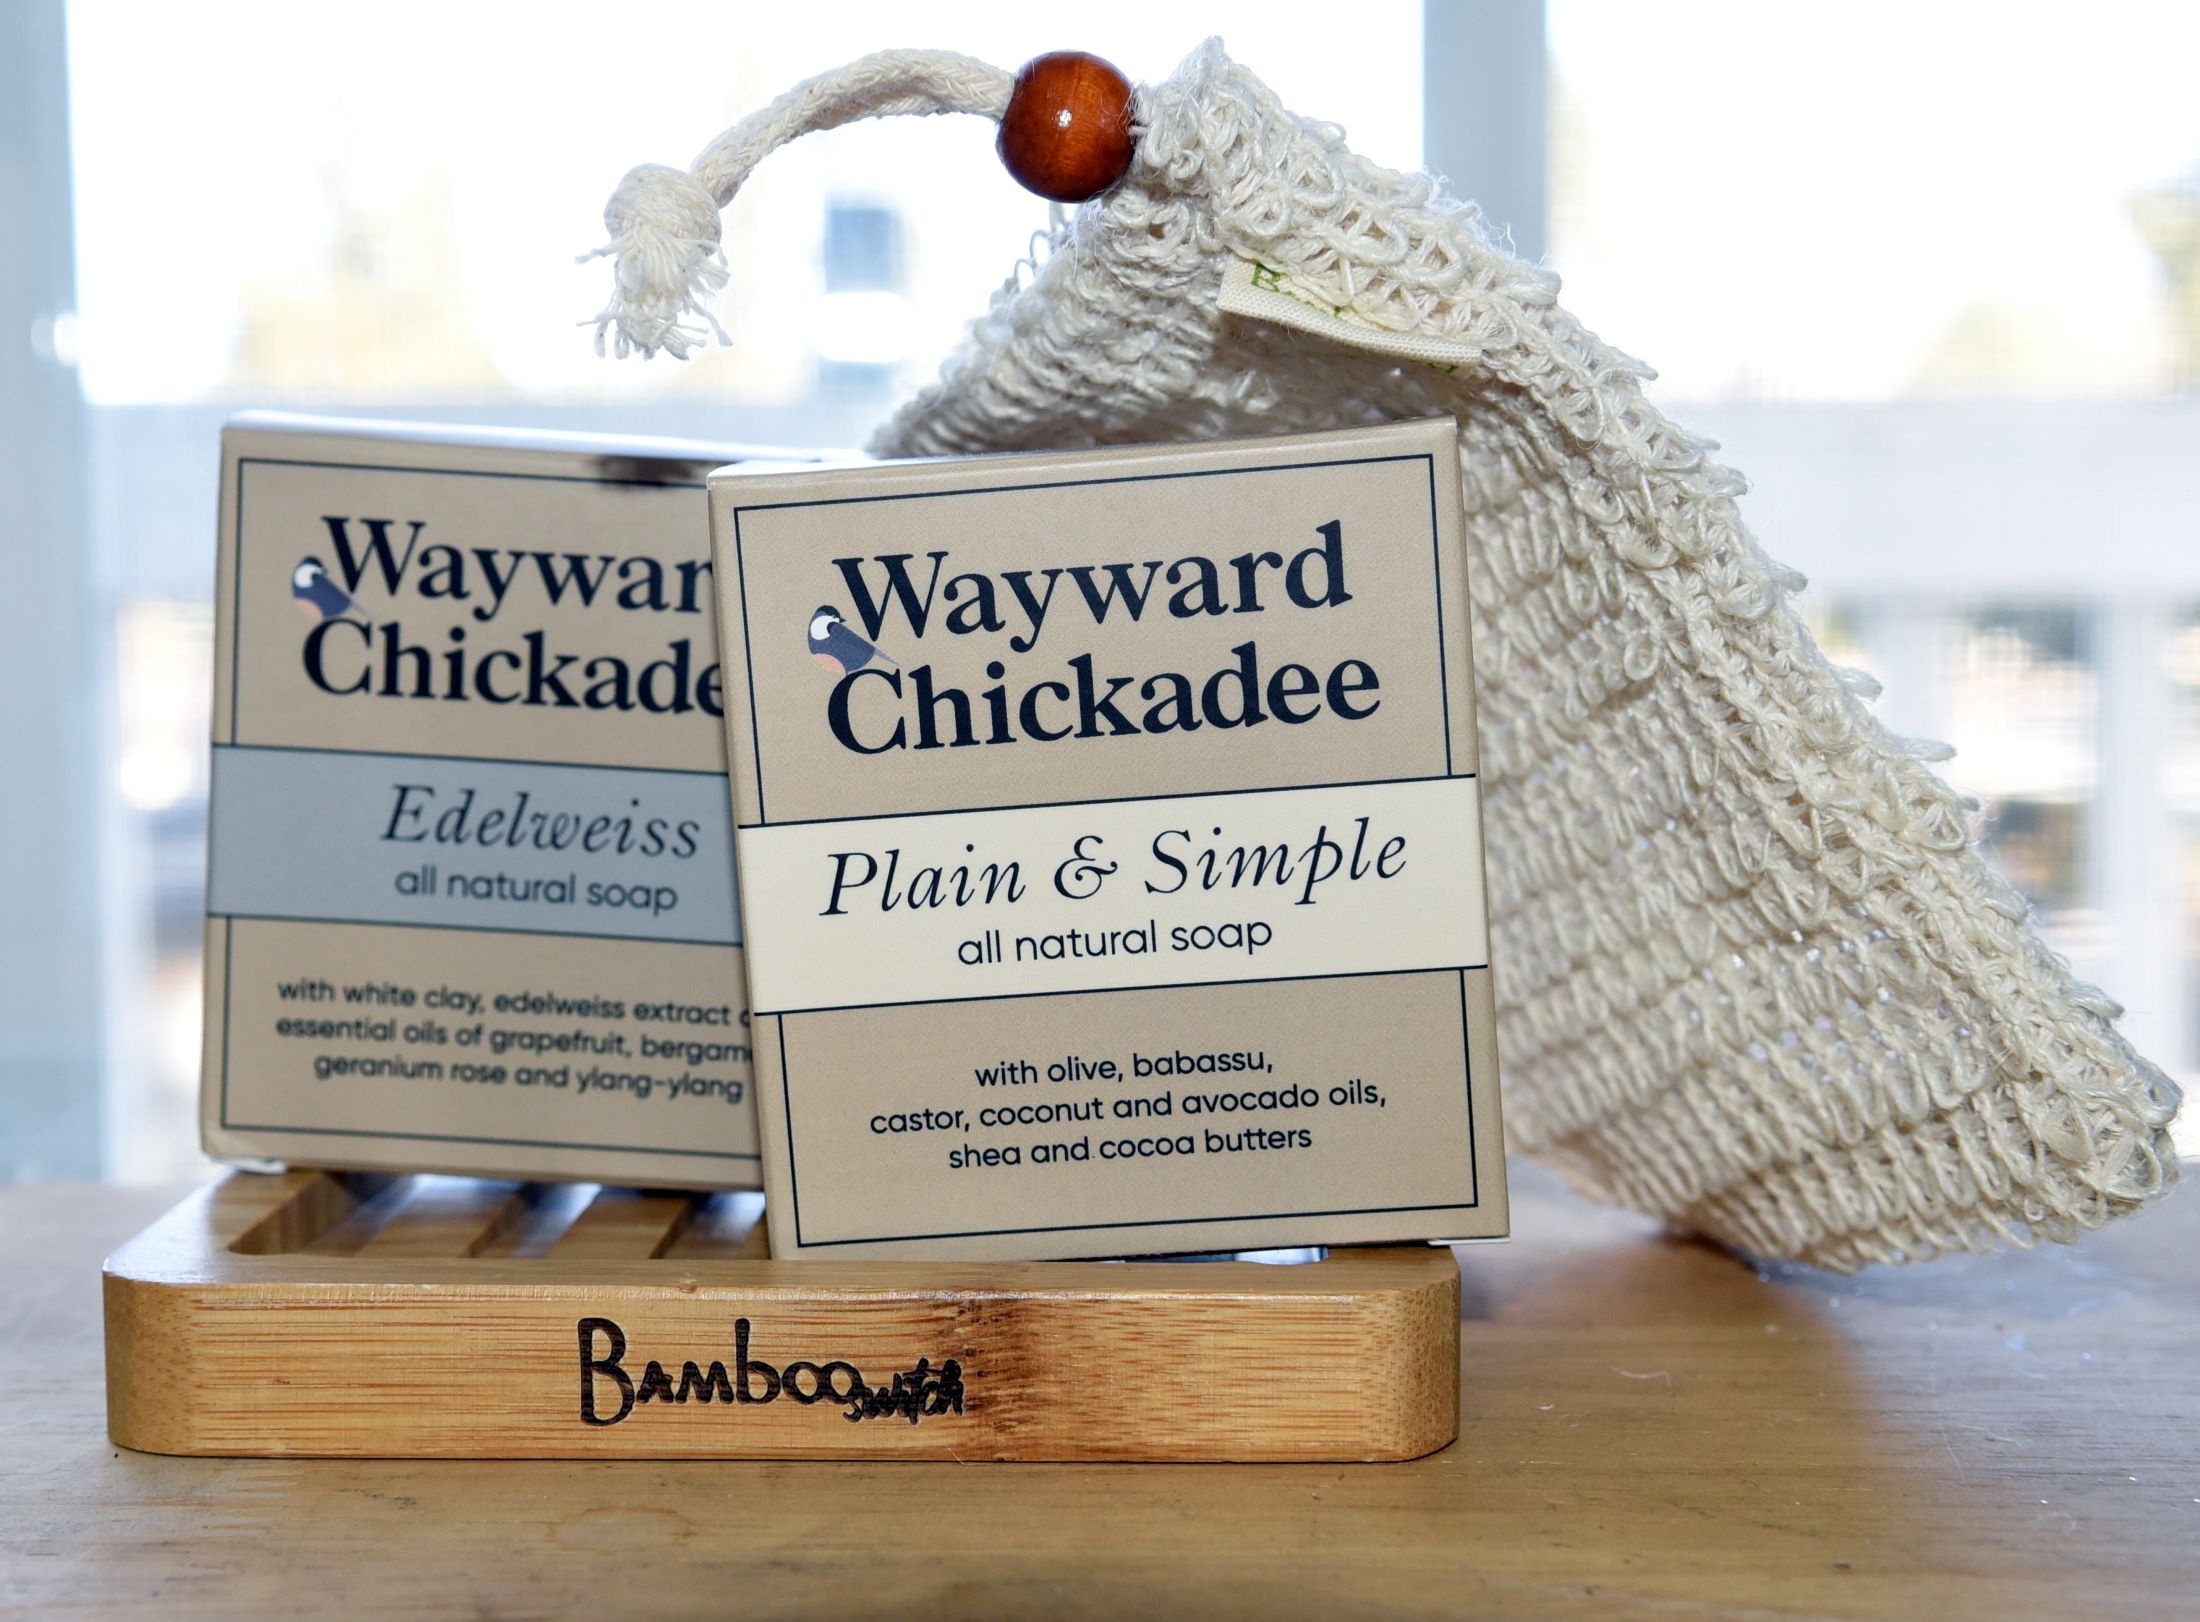 Wayward Chickadee products, available at the Chirp store.